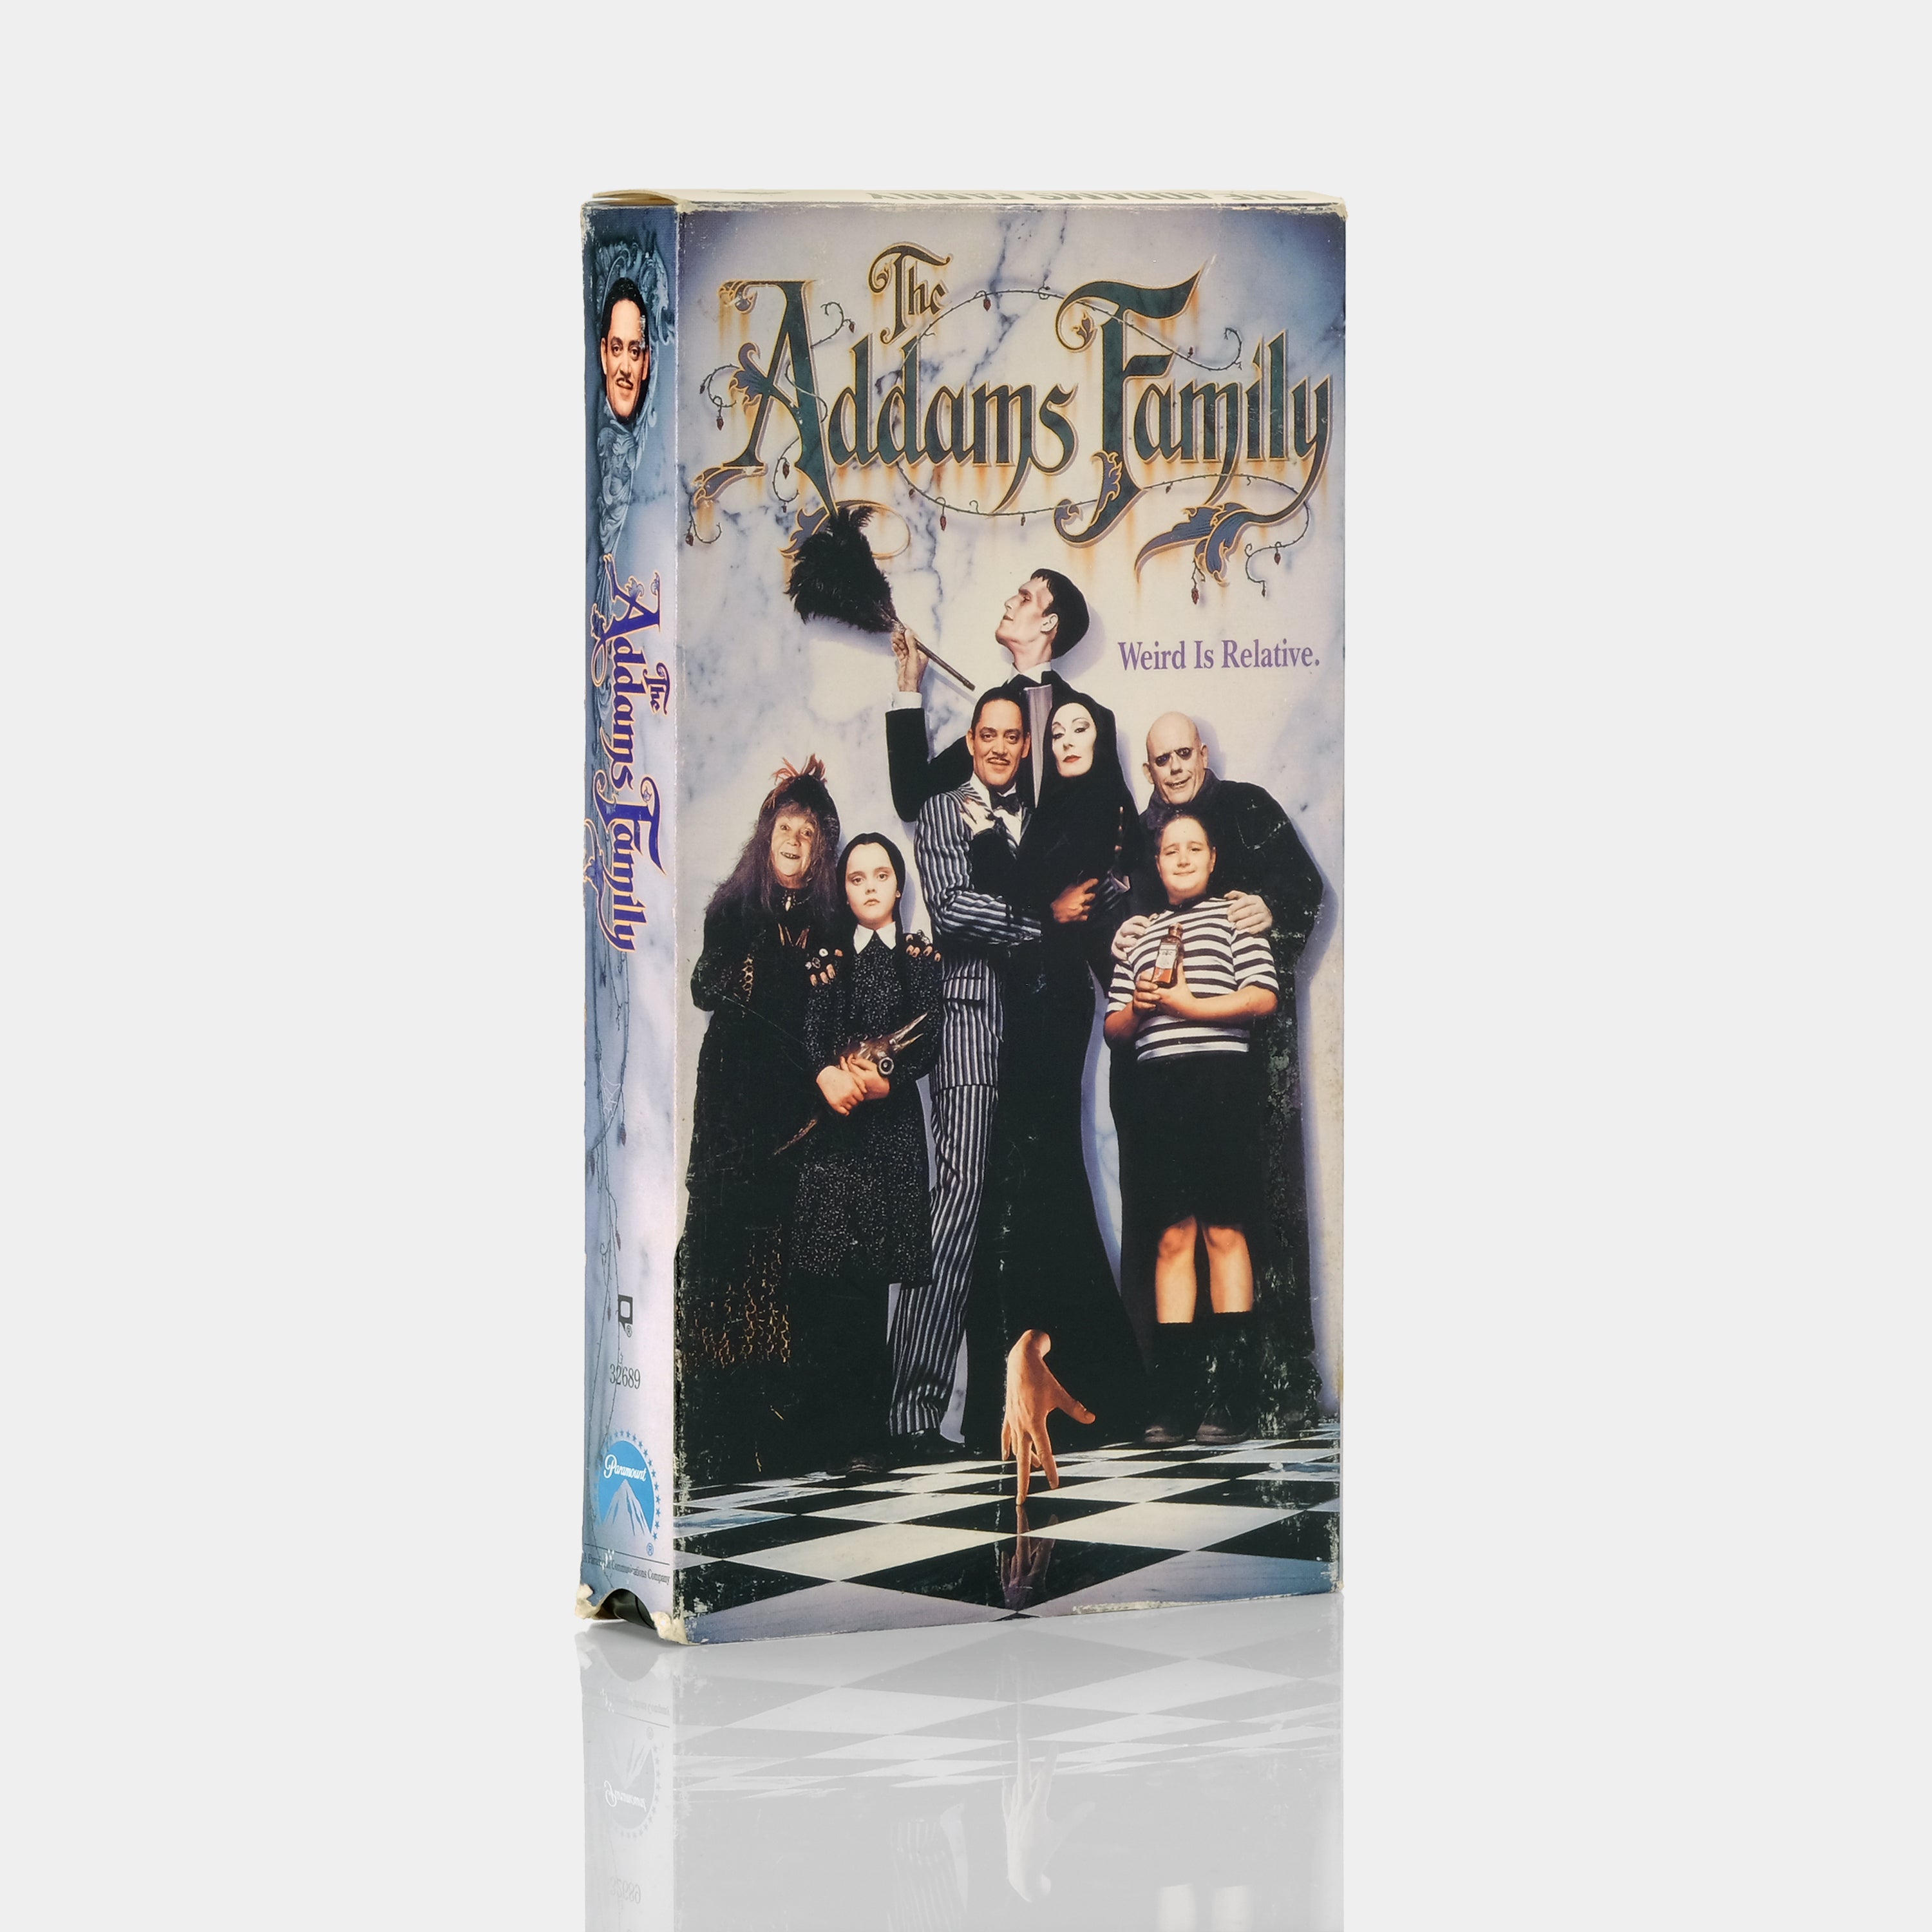 The Addams Family VHS Tape